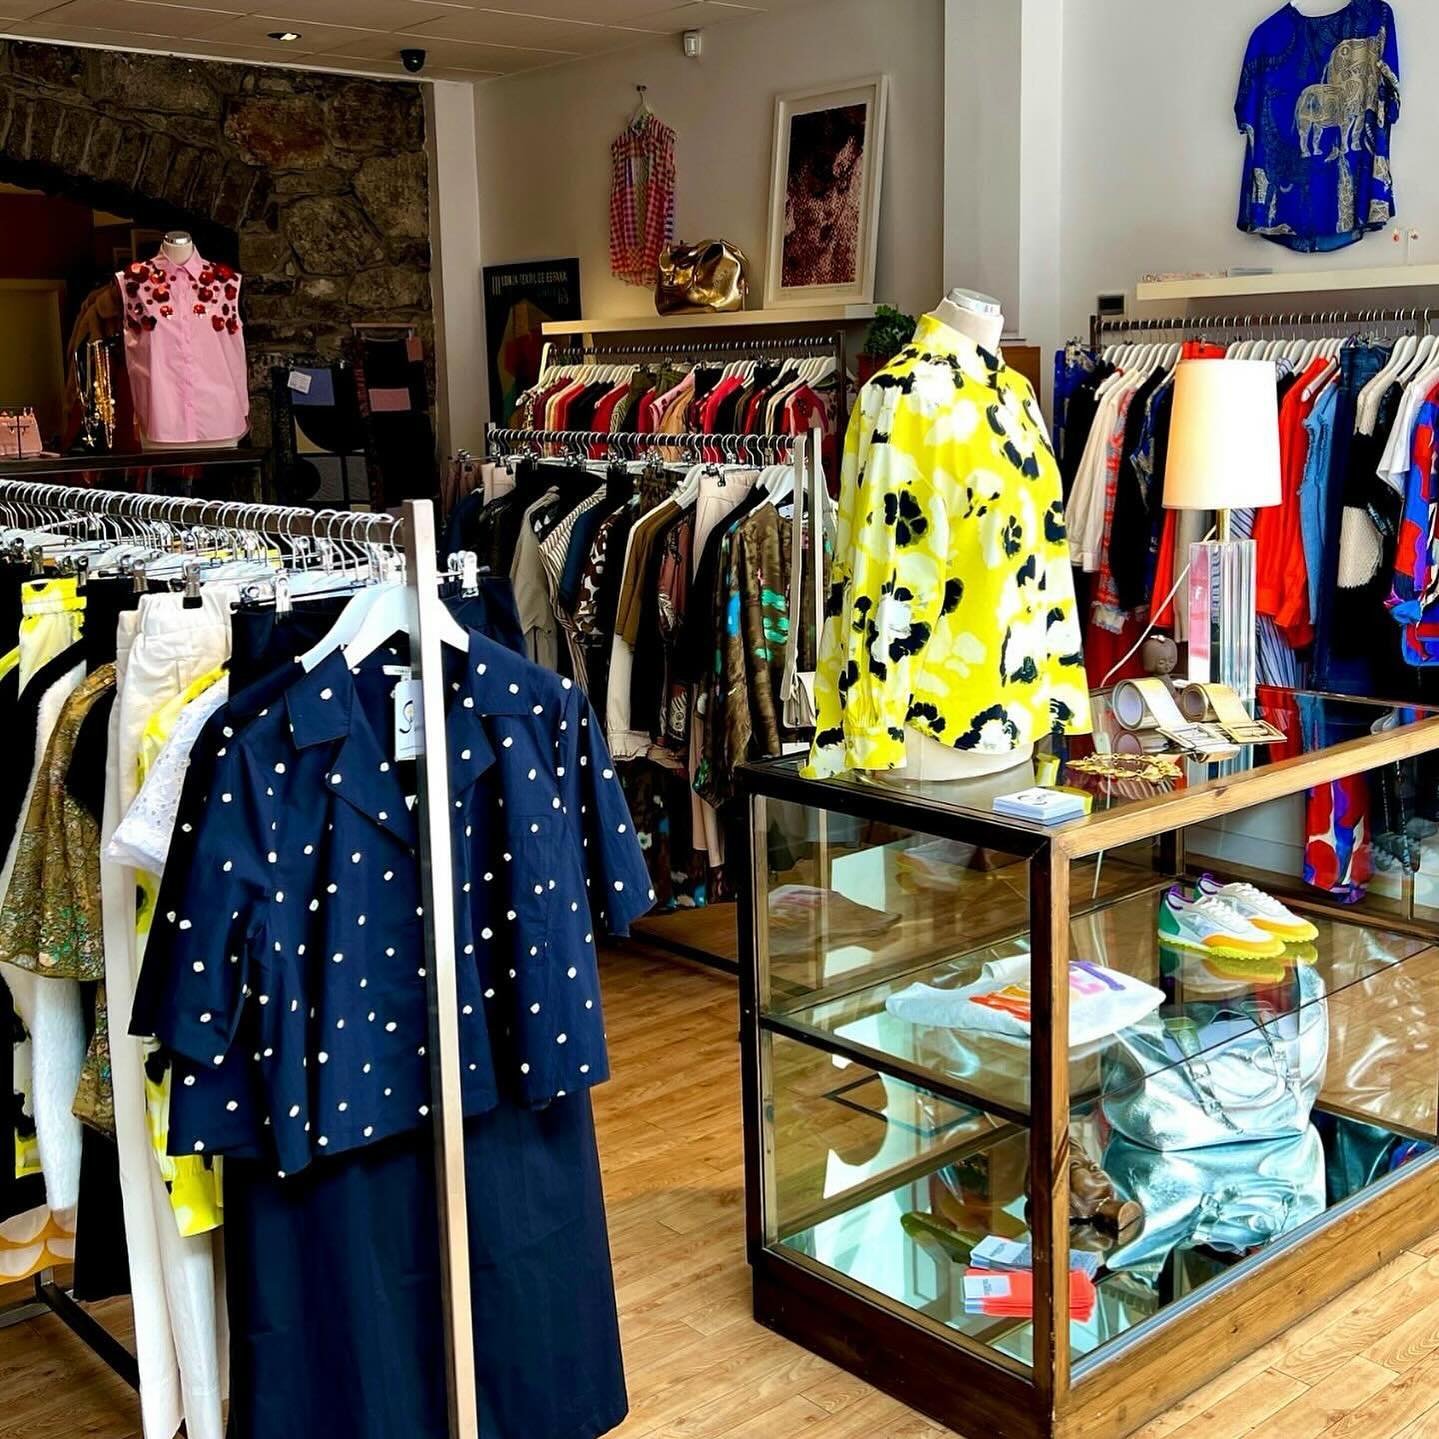 Our shops are treasure troves, filled with jewels of sartorial loveliness, seek us out and you won&rsquo;t be disappointed. 
We&rsquo;ve got very carefully edited collections that not only complement each other but more importantly, you! If you&rsquo